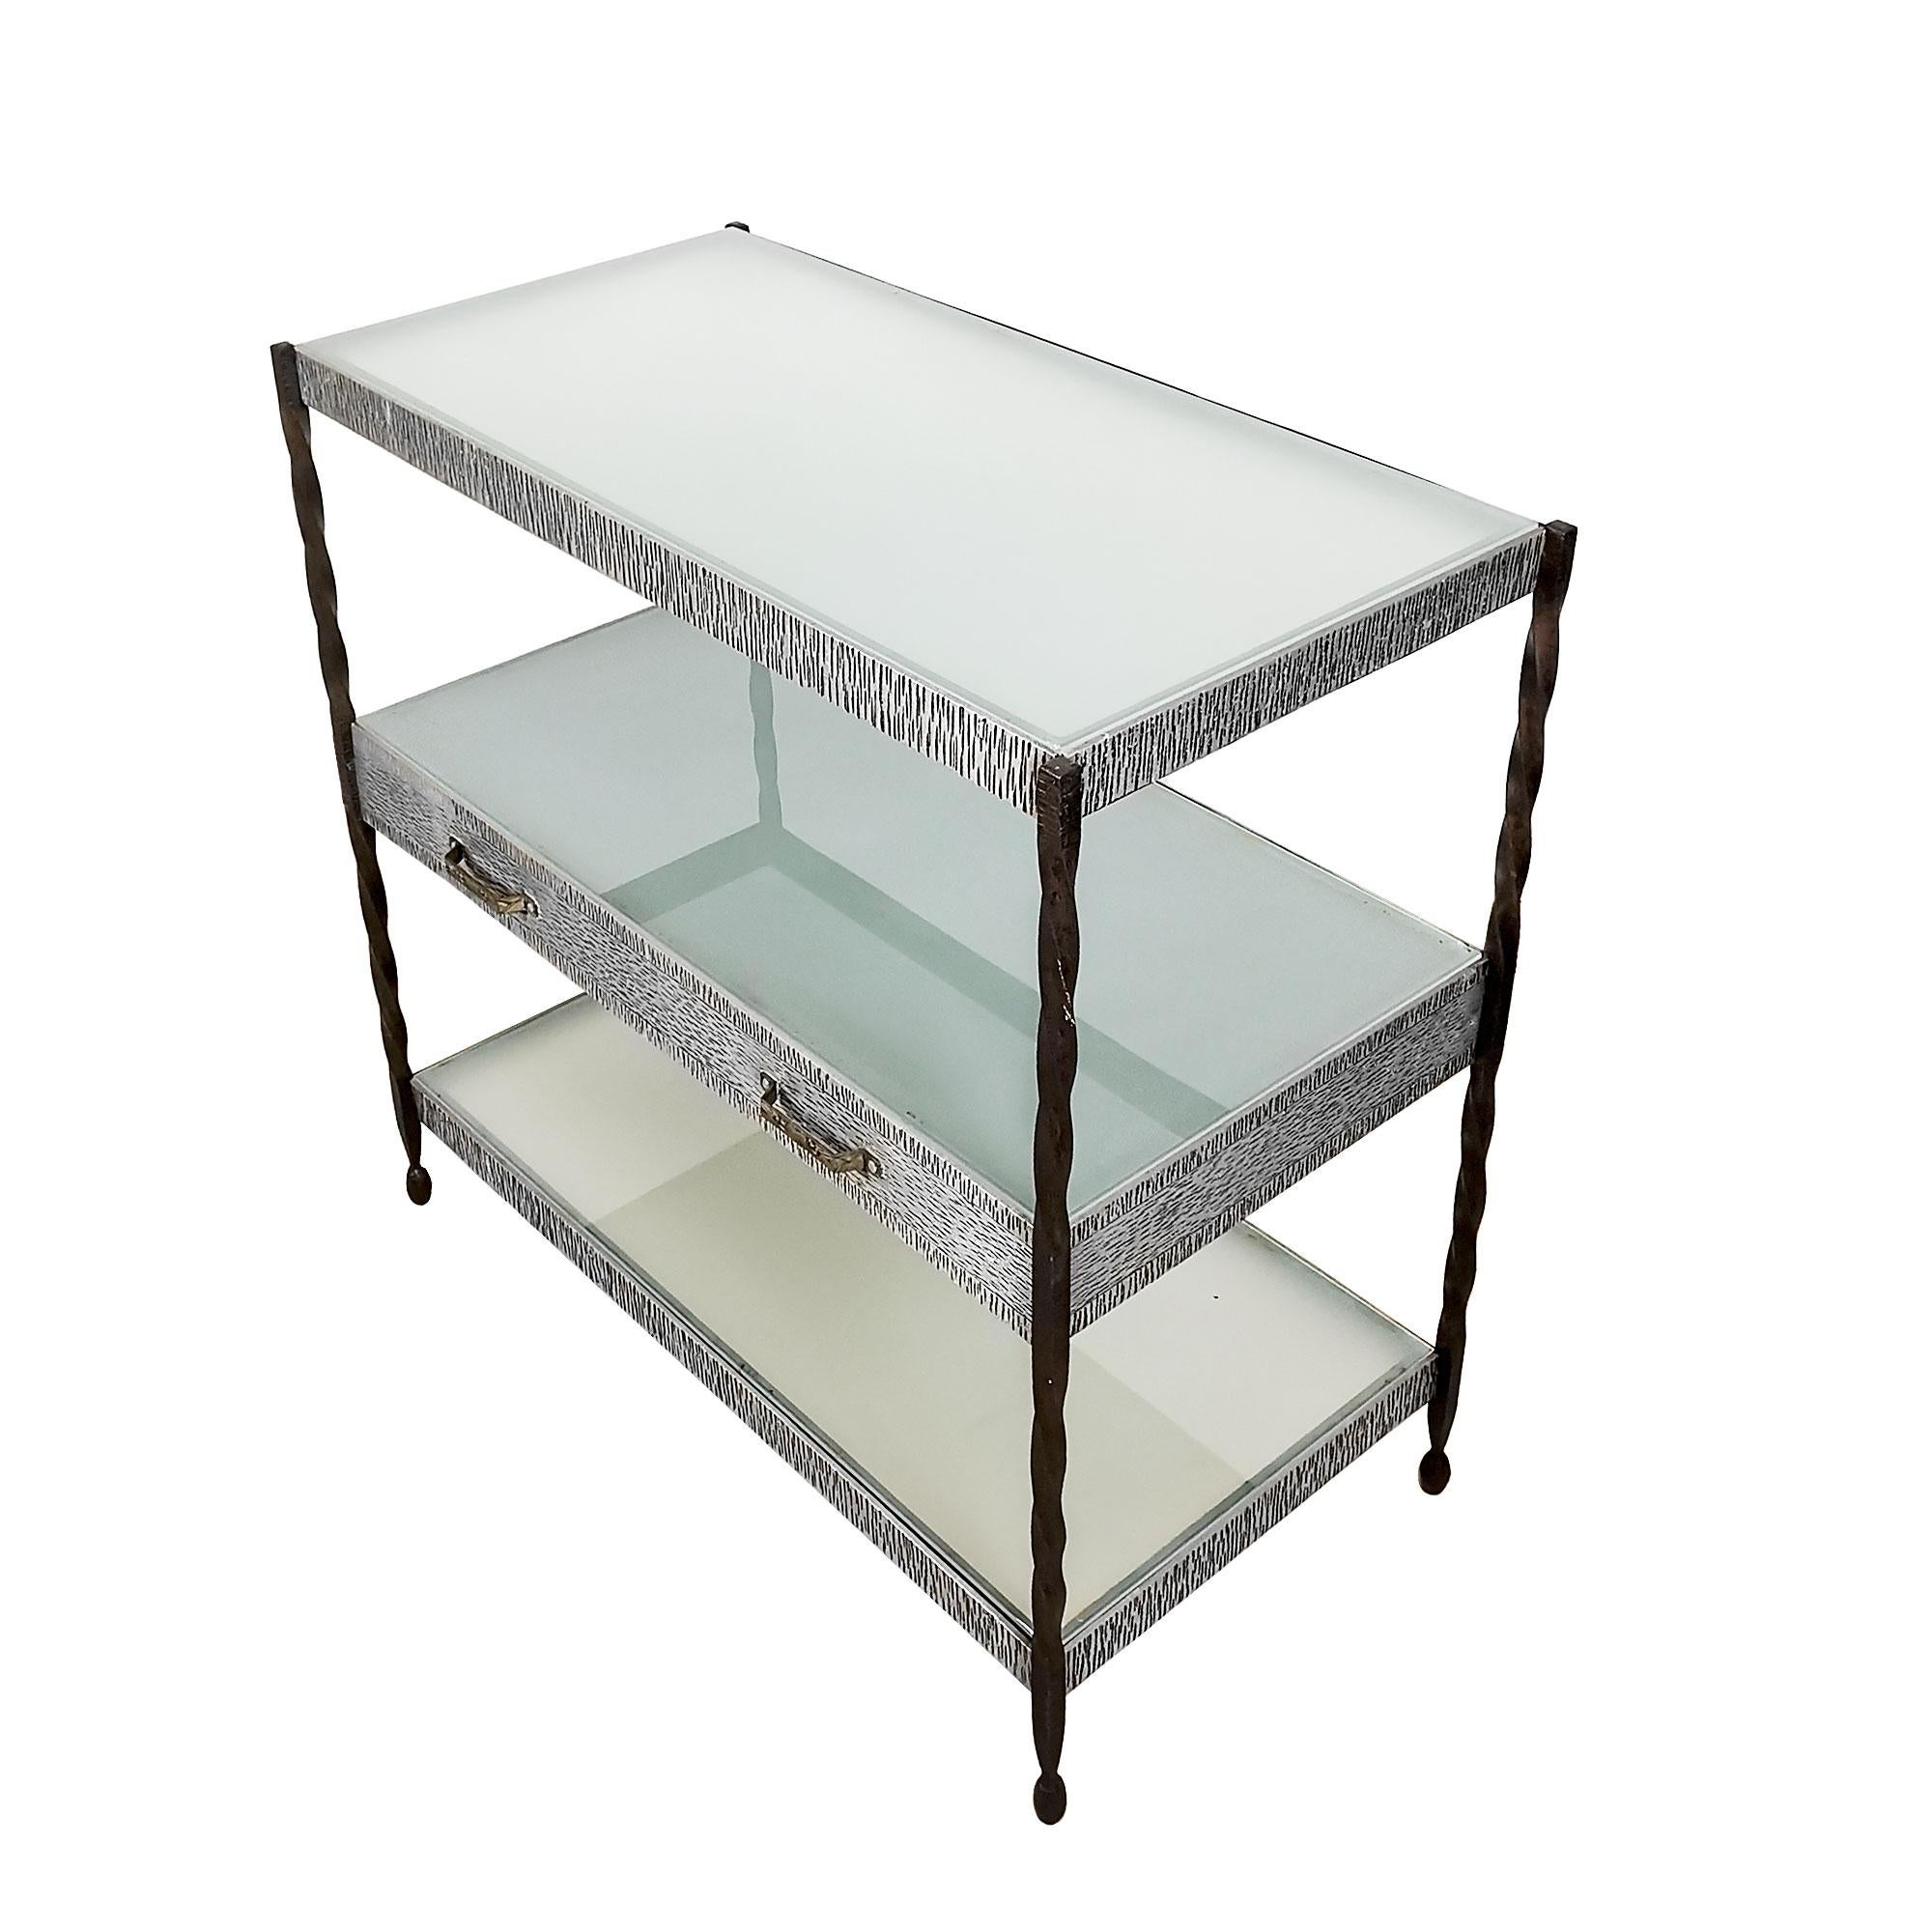 Art Deco Center Shelving Unit, Wrought Iron, Metal, Brass and Glass - France In Good Condition For Sale In Girona, ES